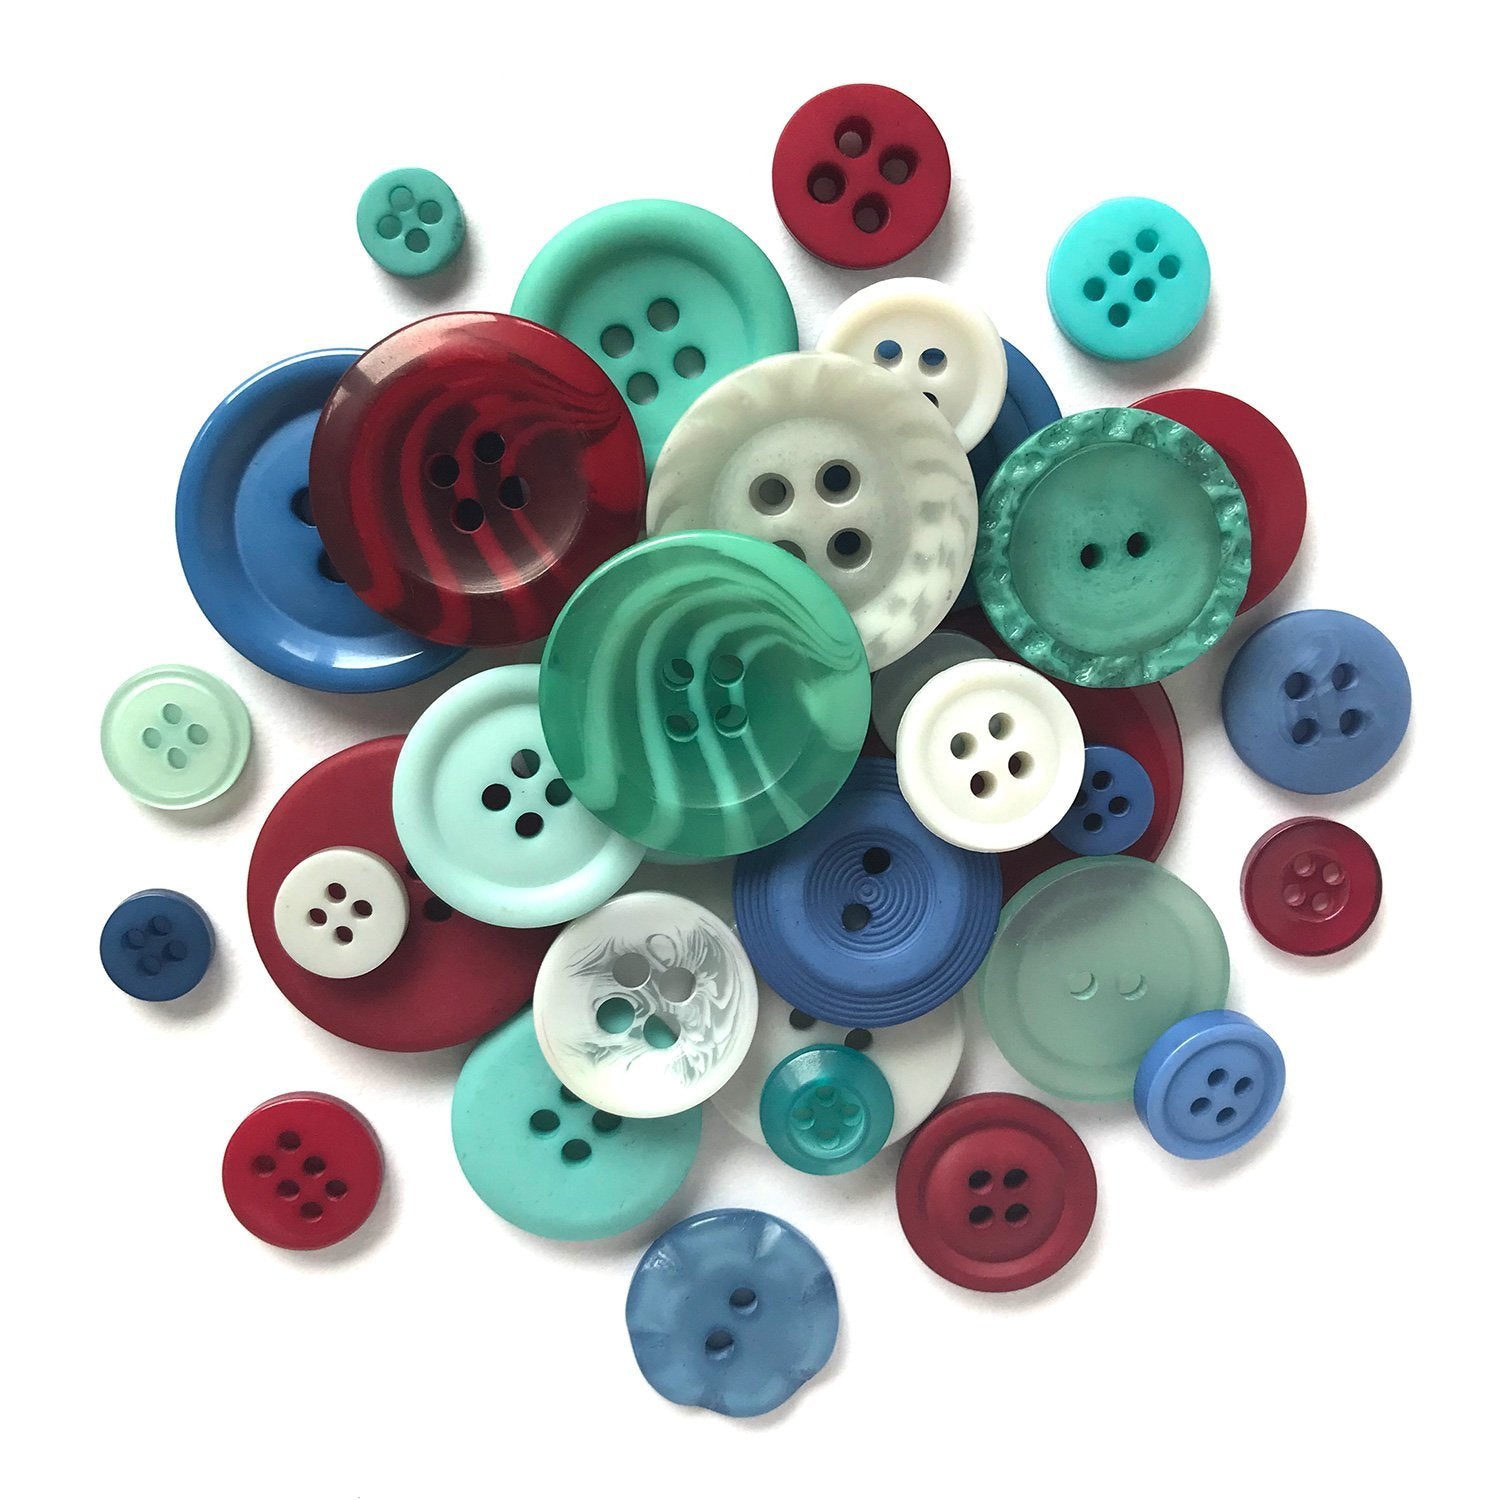  1600Pcs Christmas Craft Buttons Mixed Red Green White Button  for Crafts Assorted Sizes Button Green Red White in Bulk : Arts, Crafts &  Sewing